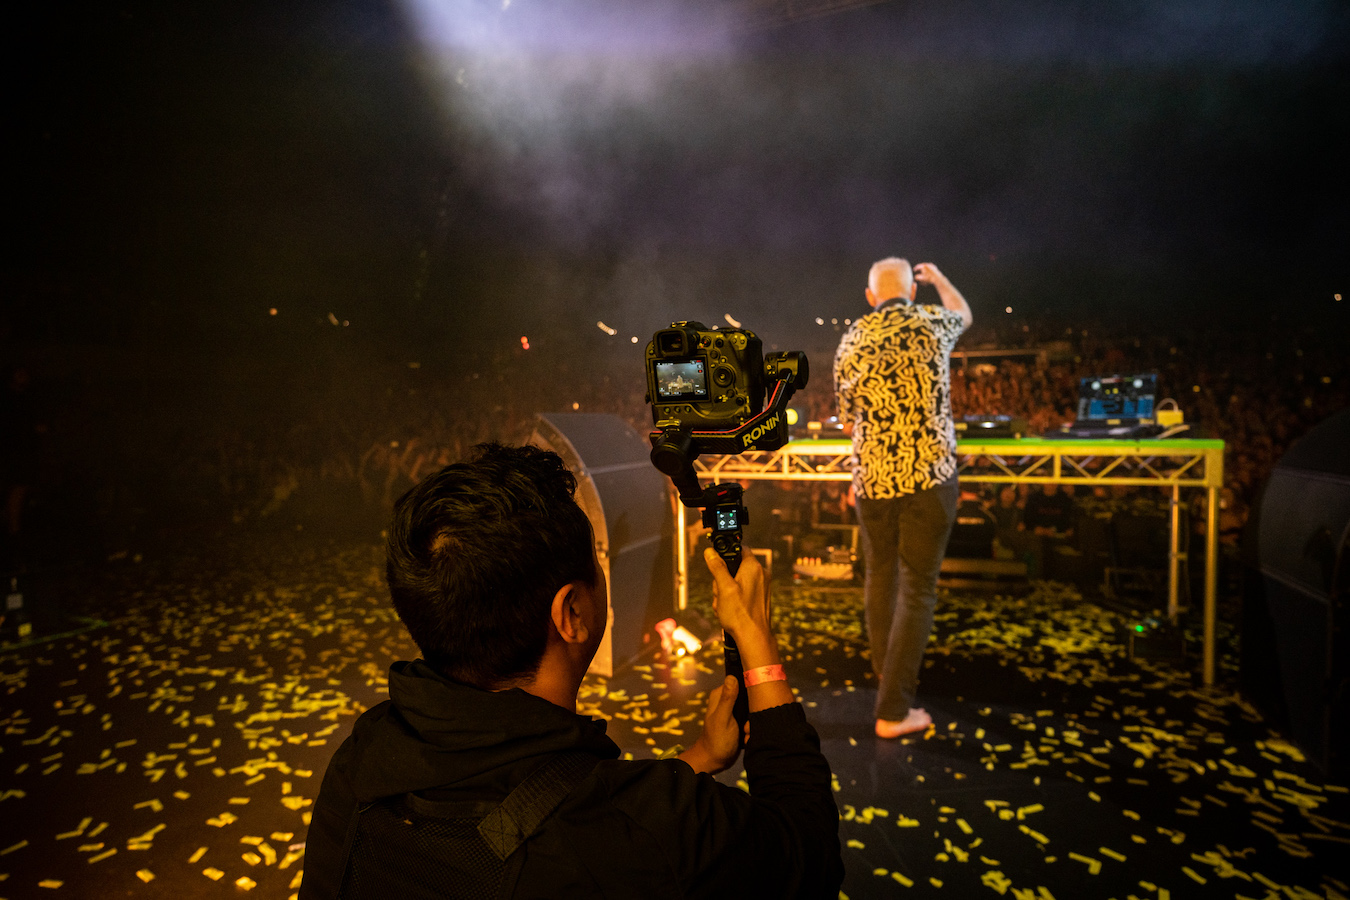 Brian Purnell filiming Fatboy Slim from behind as he performs on stage 